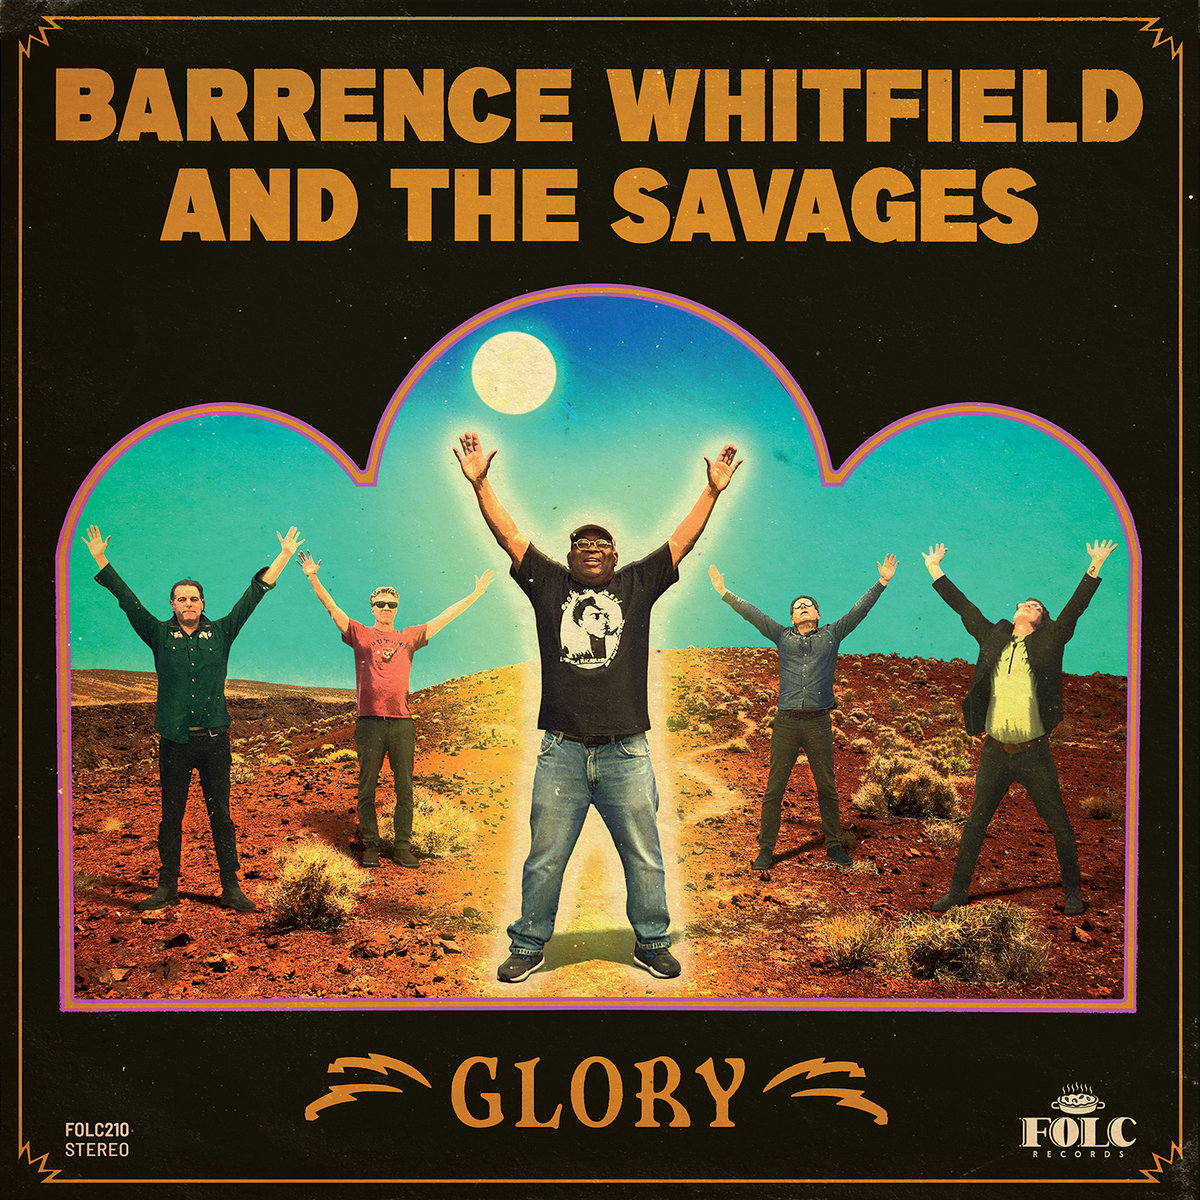 Barrence Whitfield &amp; The Savages - Glory  (Vinyl LP) *Spesialimport*